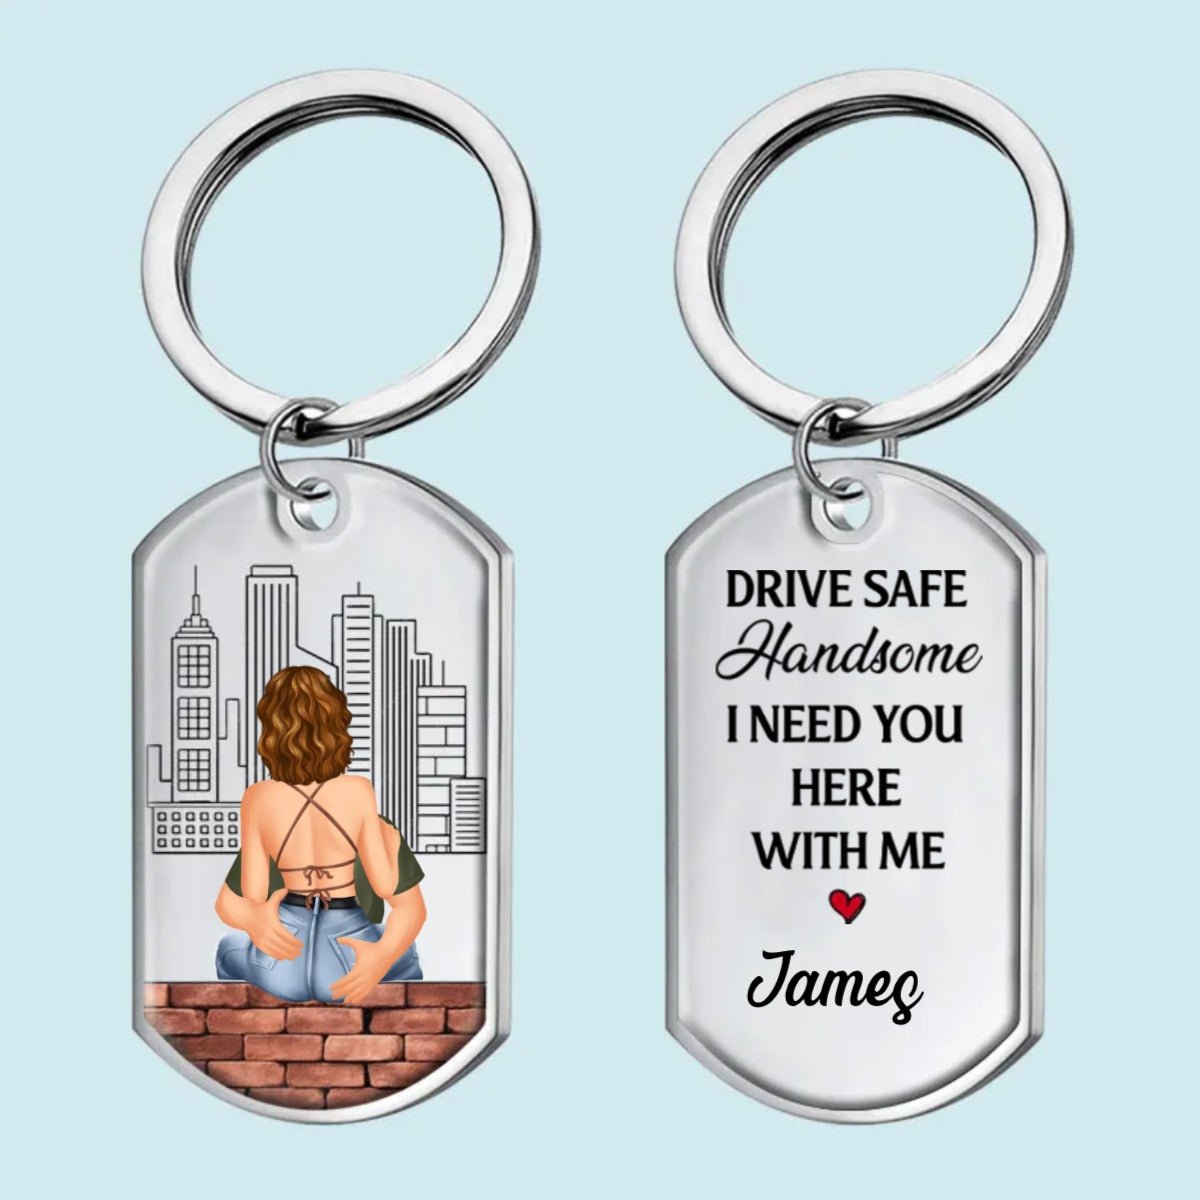 Couple - I Need You Here With Me - Personalized Acrylic Keychain - The Next Custom Gift